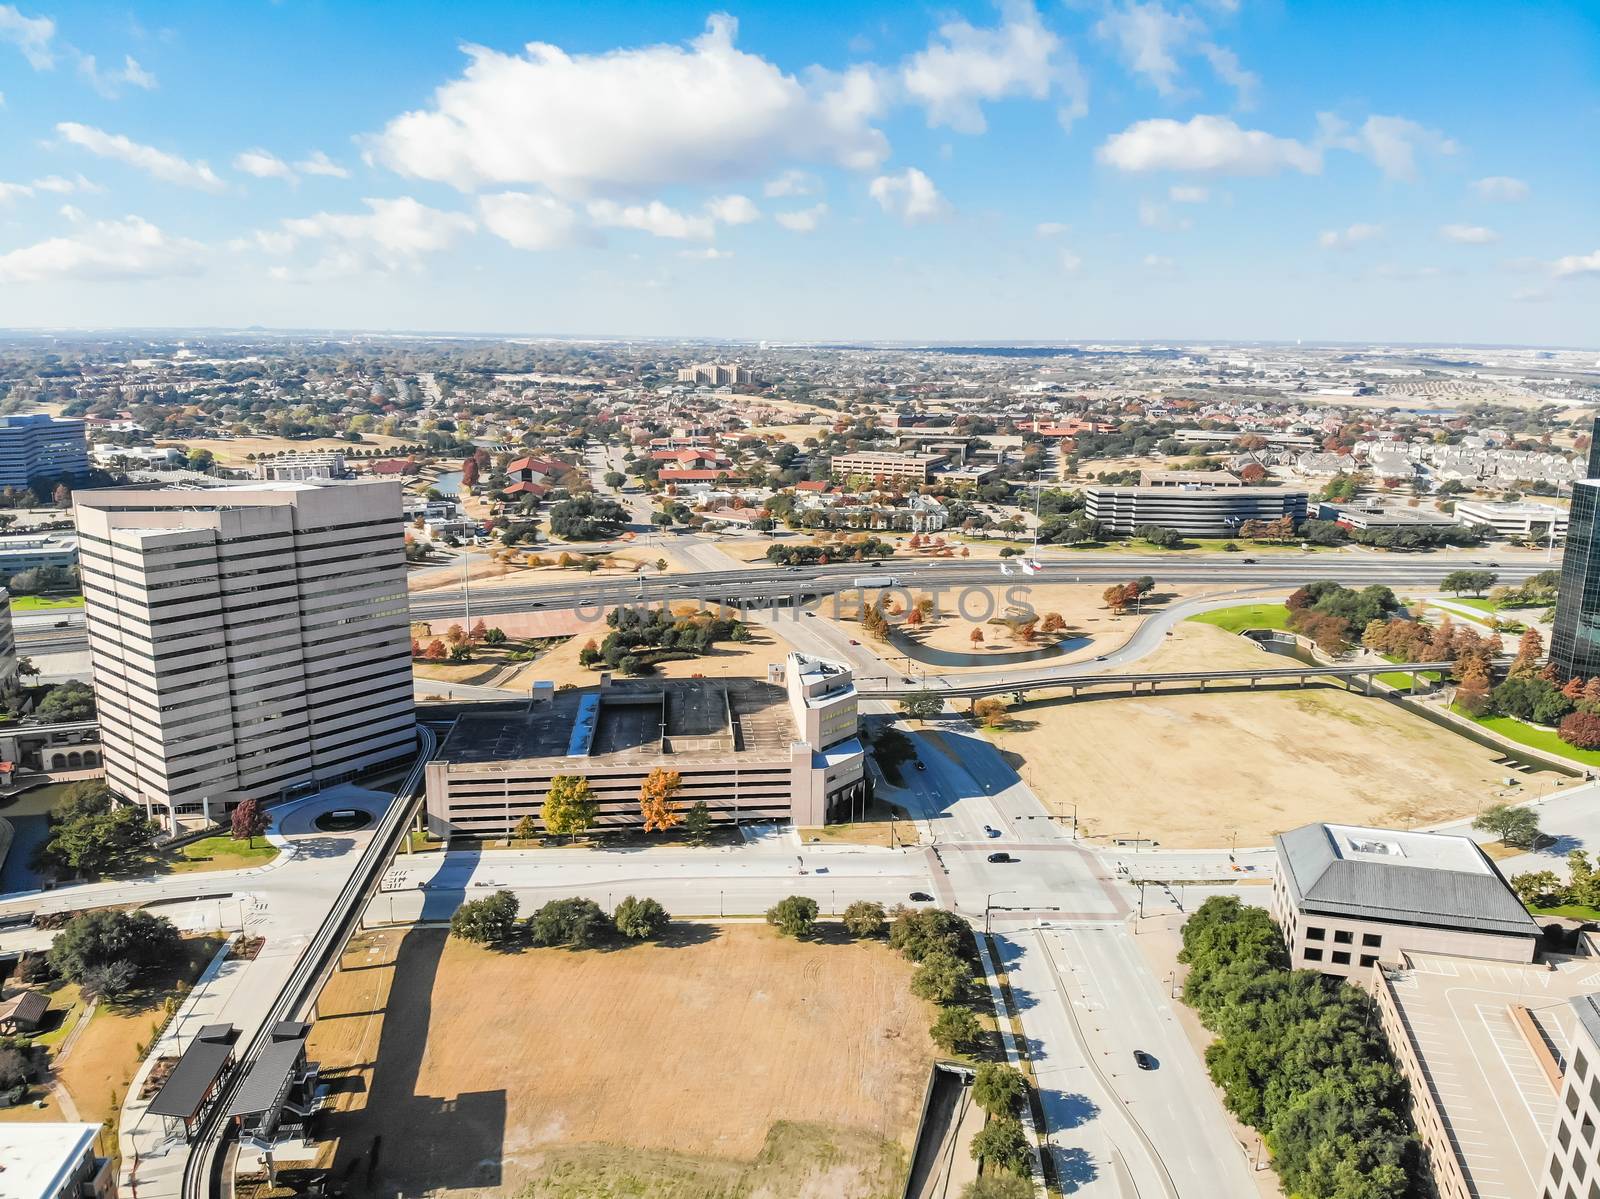 Top view light rail system and skylines in downtown Las Colinas, by trongnguyen